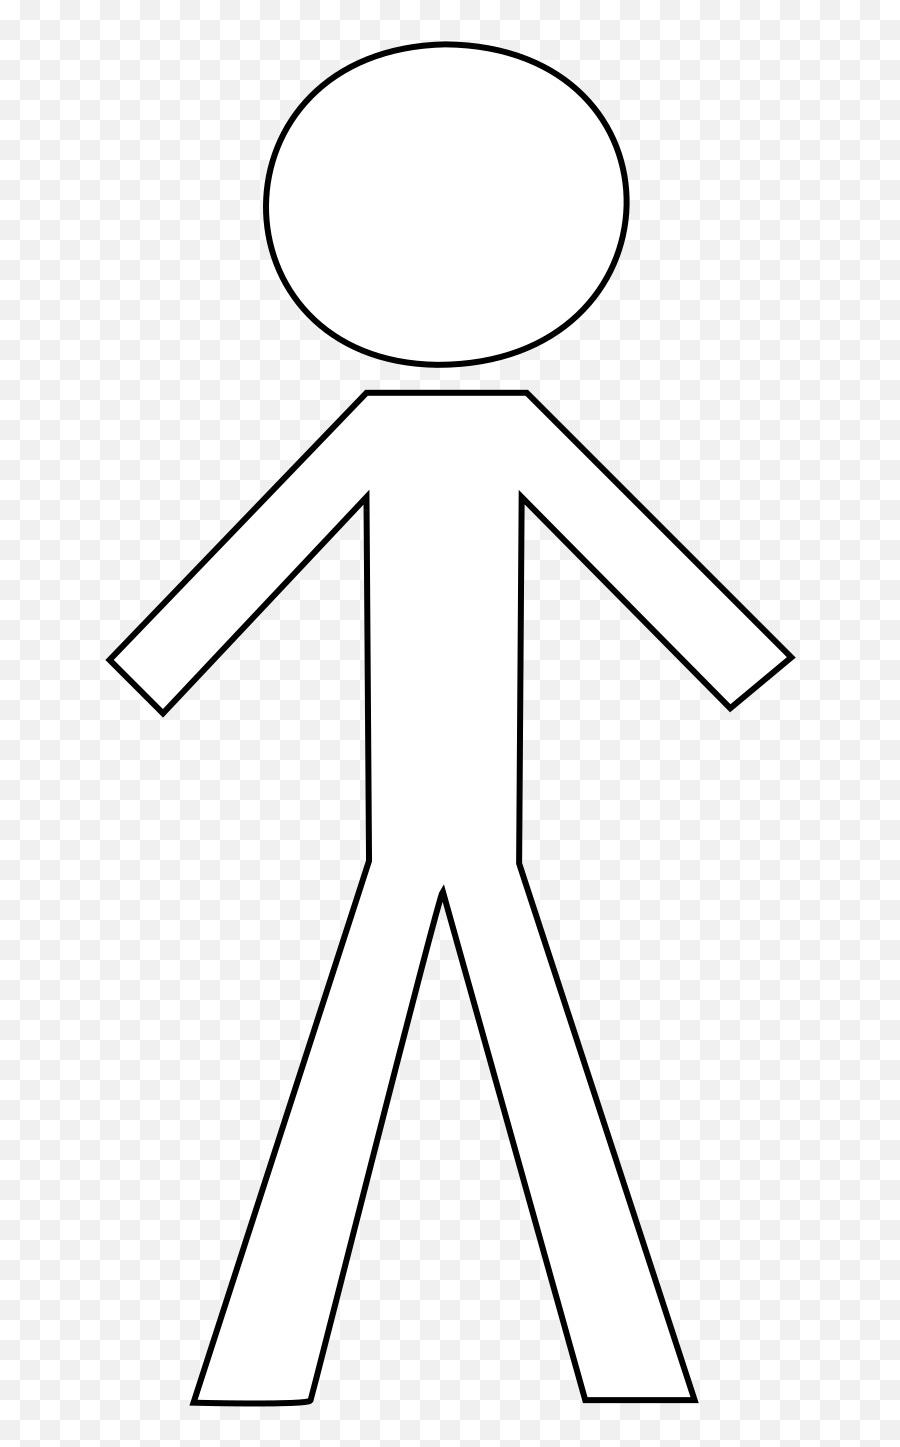 Black And White Stick Figures Png Image - Stick Figure White On Black Emoji,Stick Figure Png